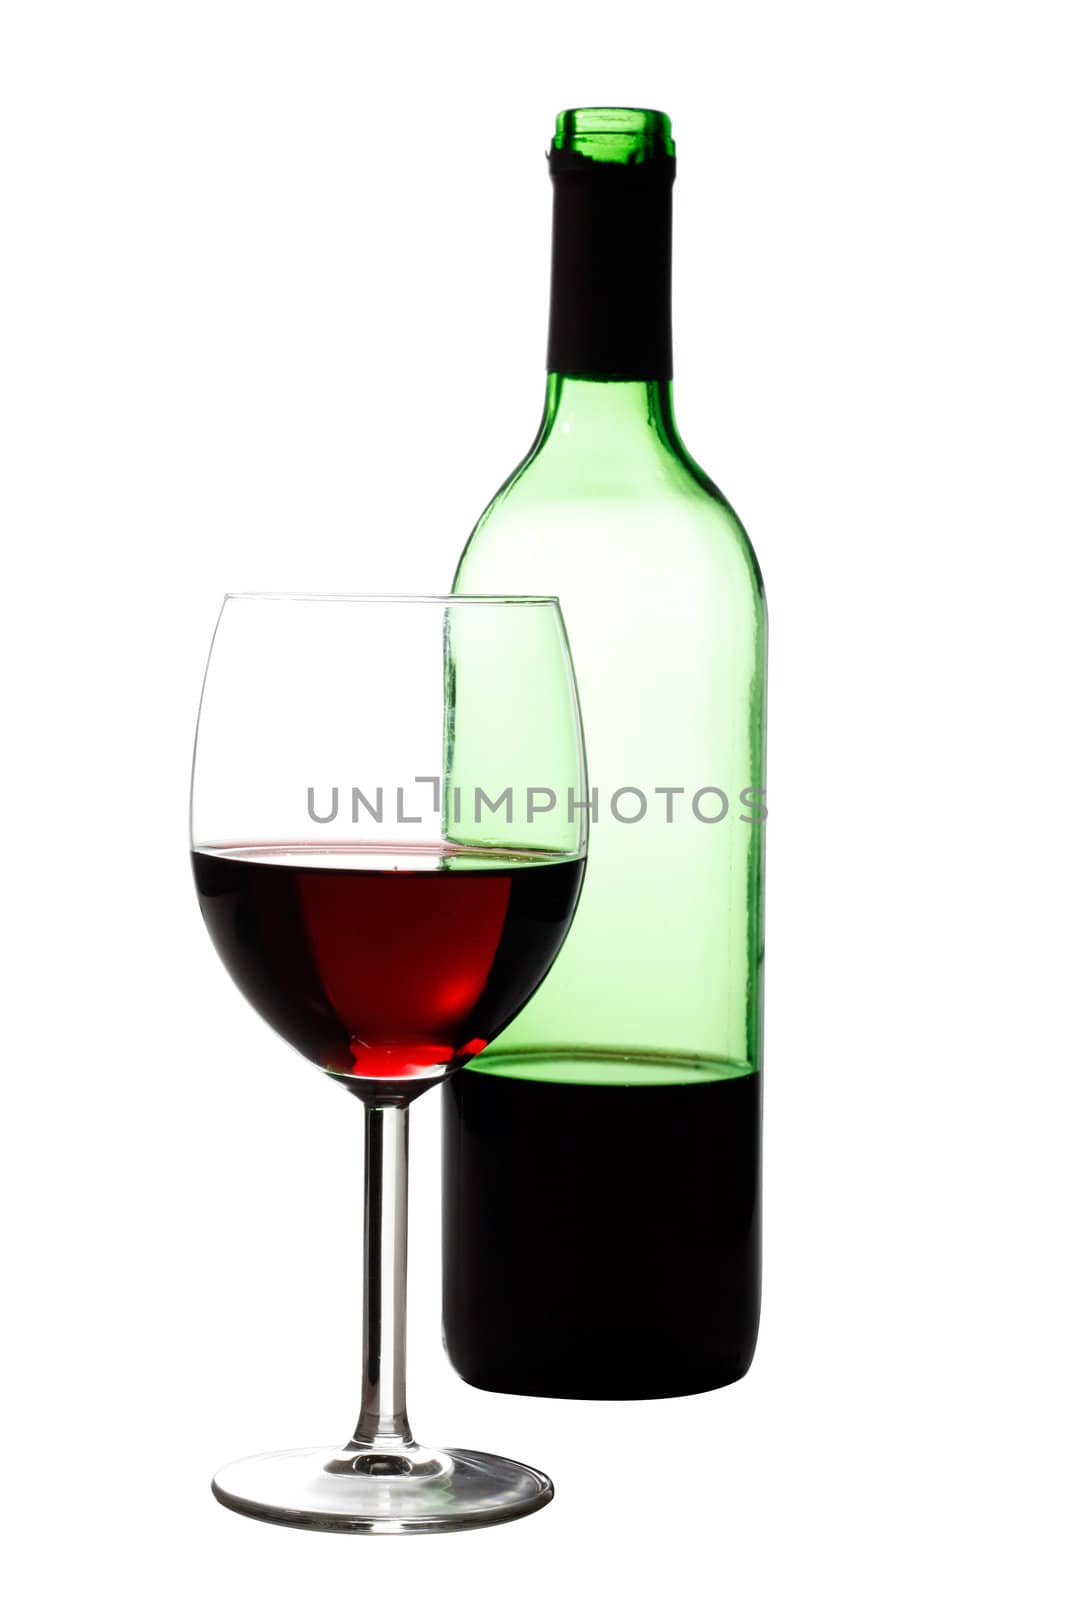 A glass and bottle of red wine